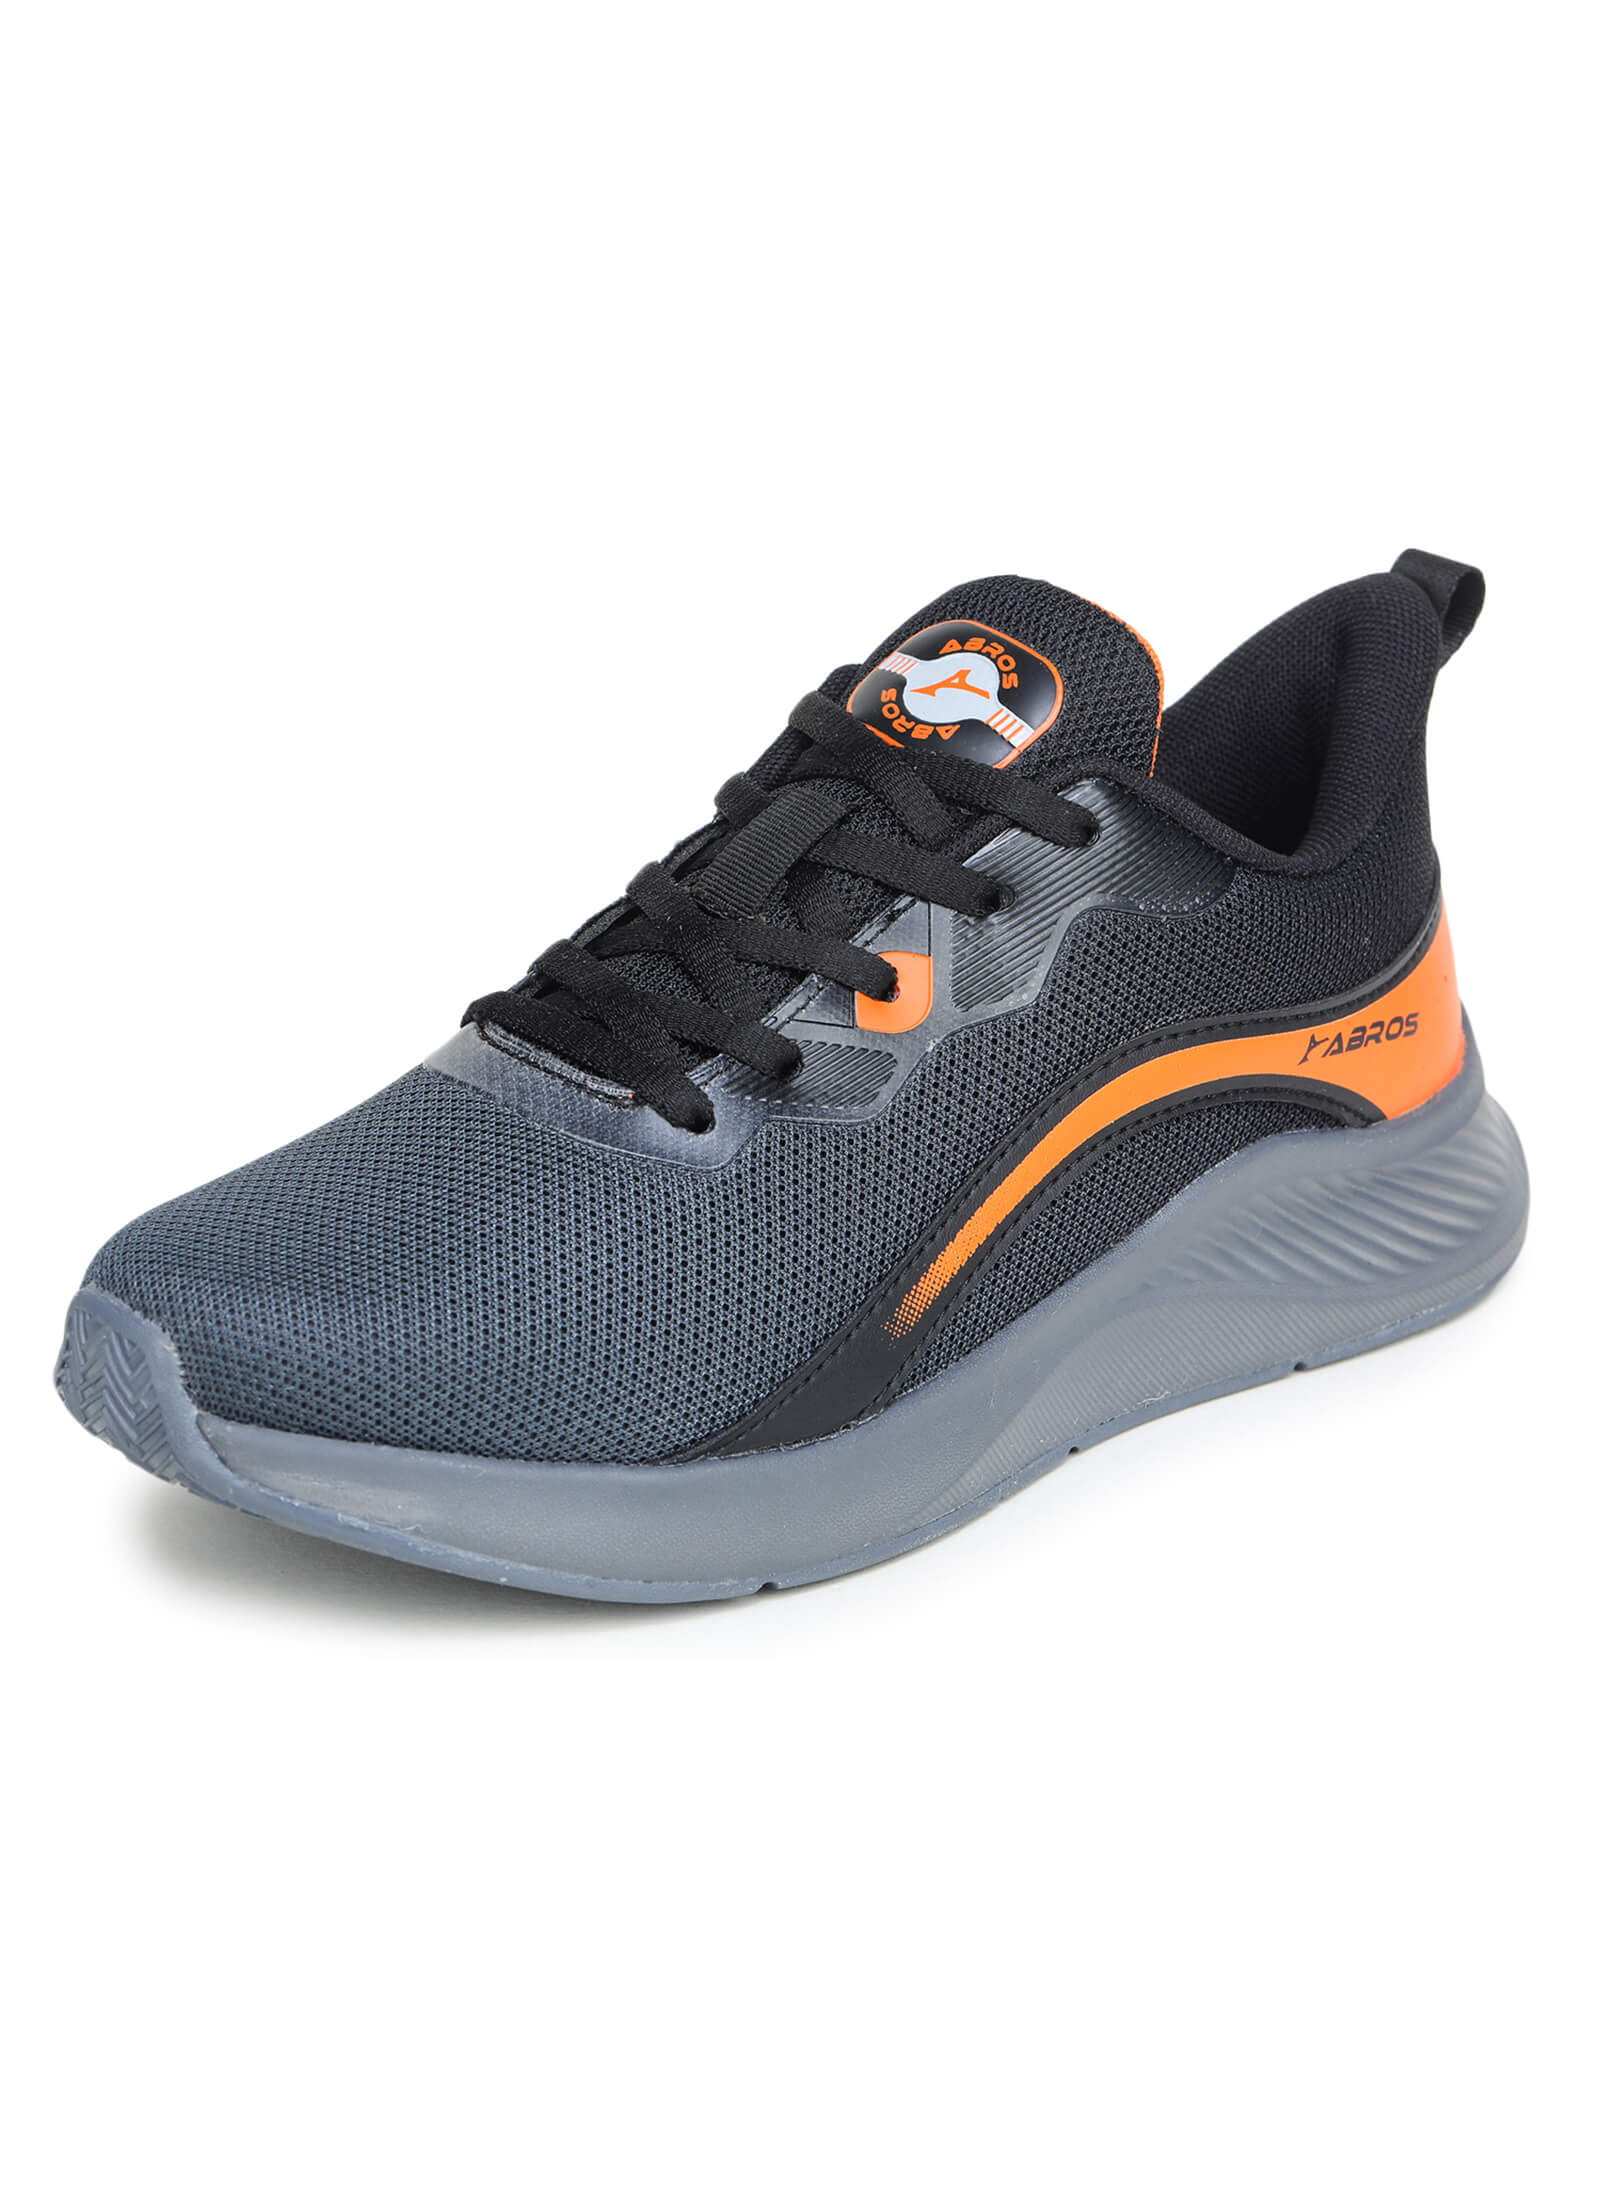 Alin Sports Shoes For Men